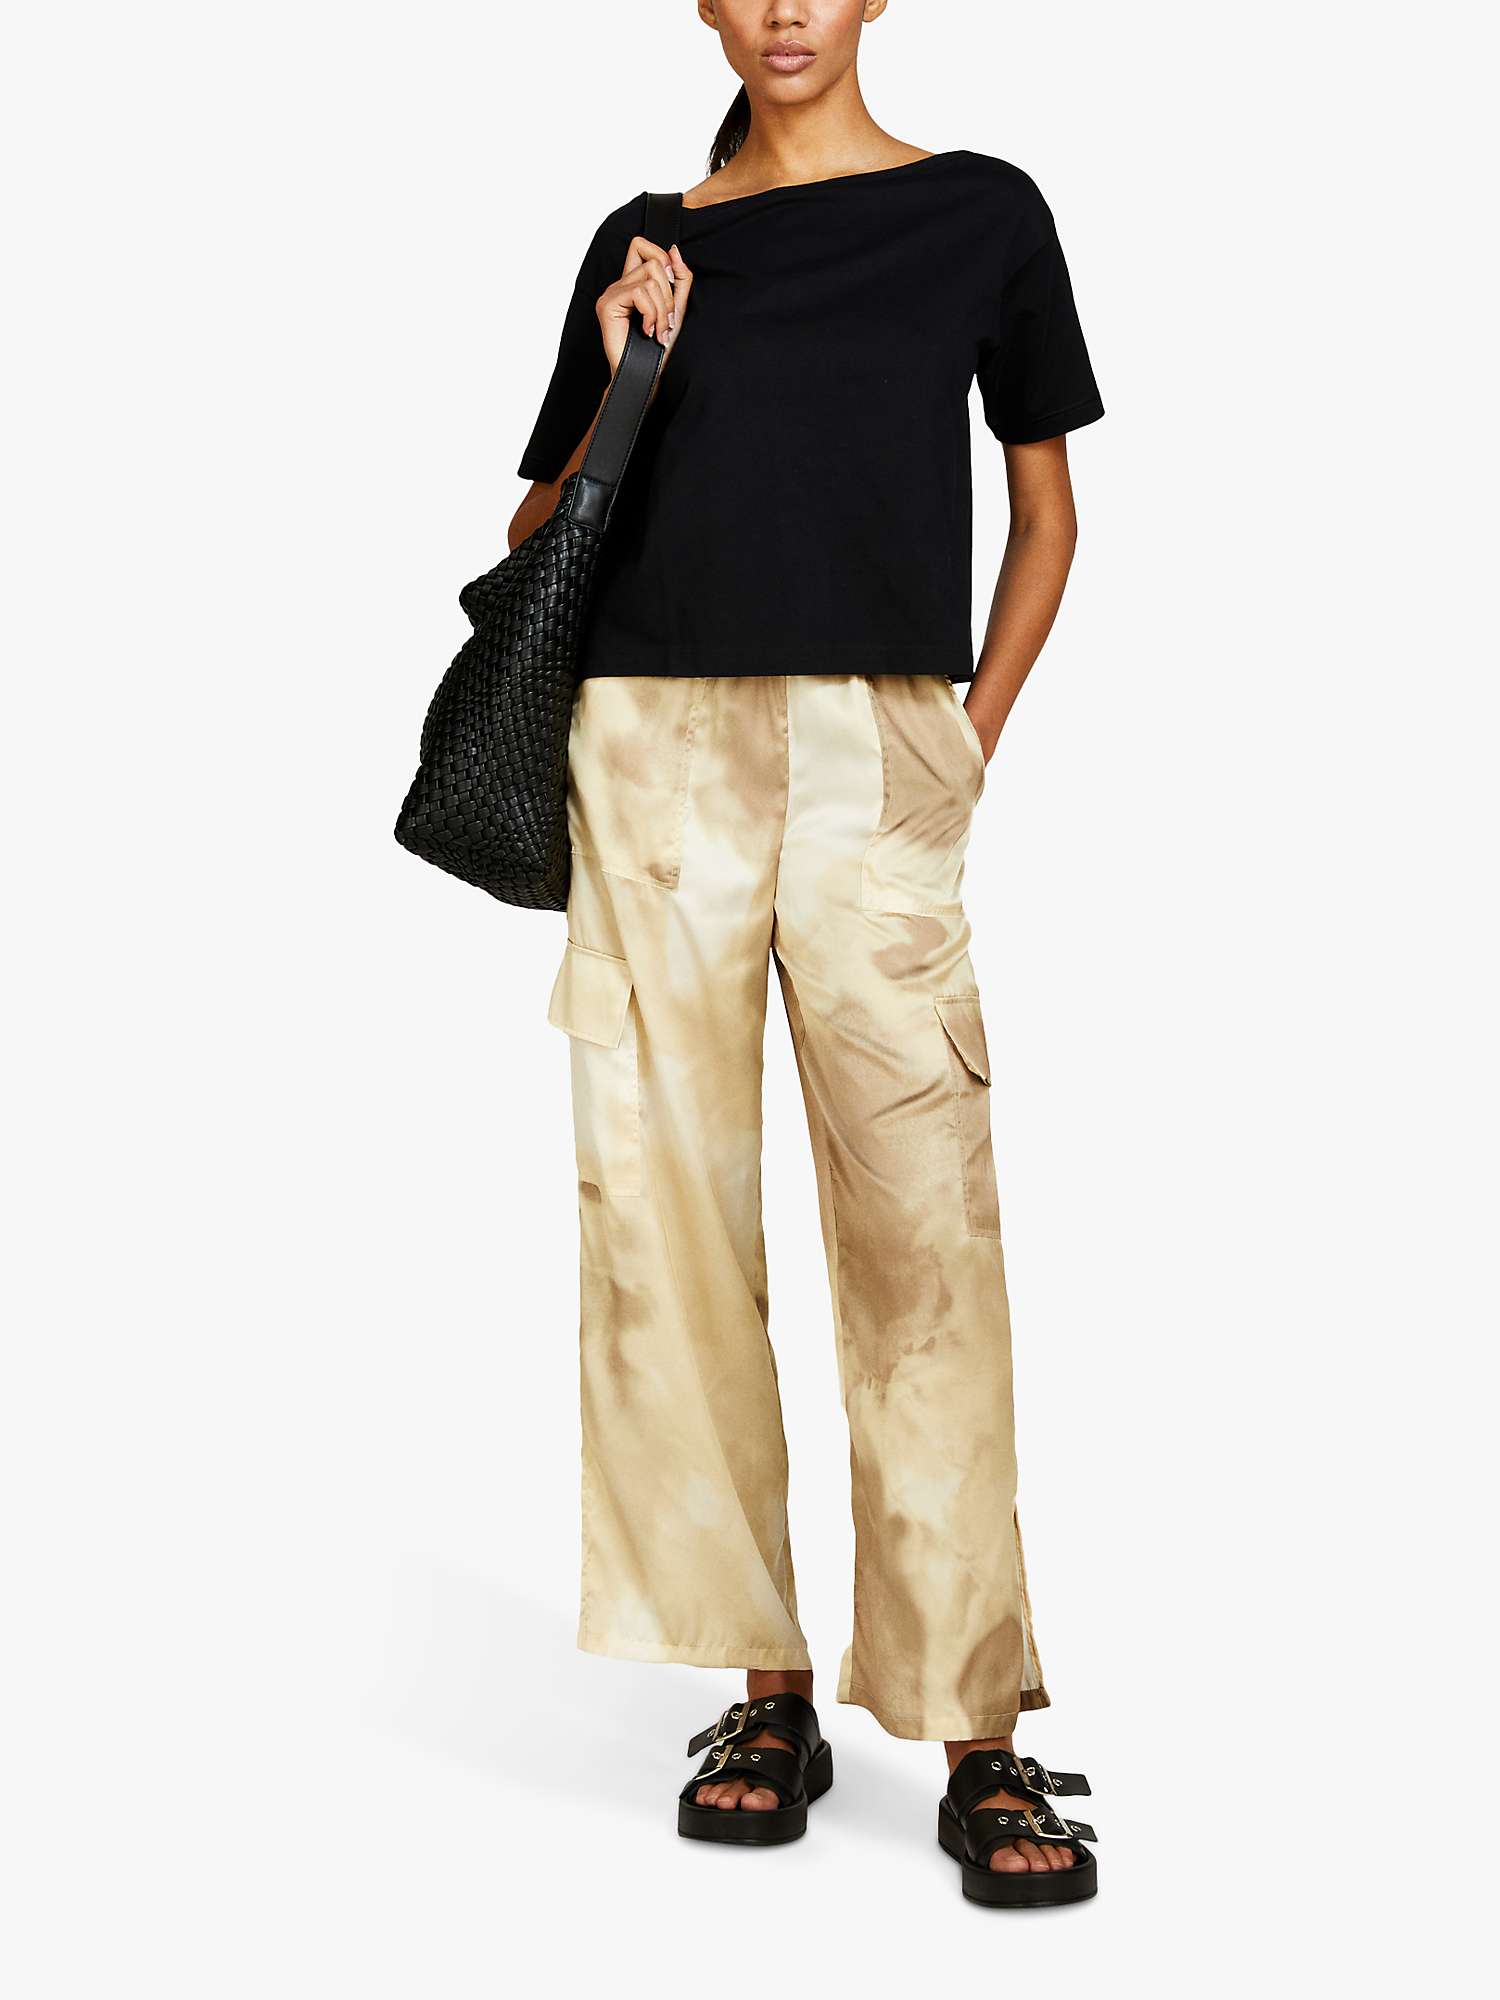 Buy SISLEY Boxy Fit Cropped Boat Neck T-Shirt Online at johnlewis.com